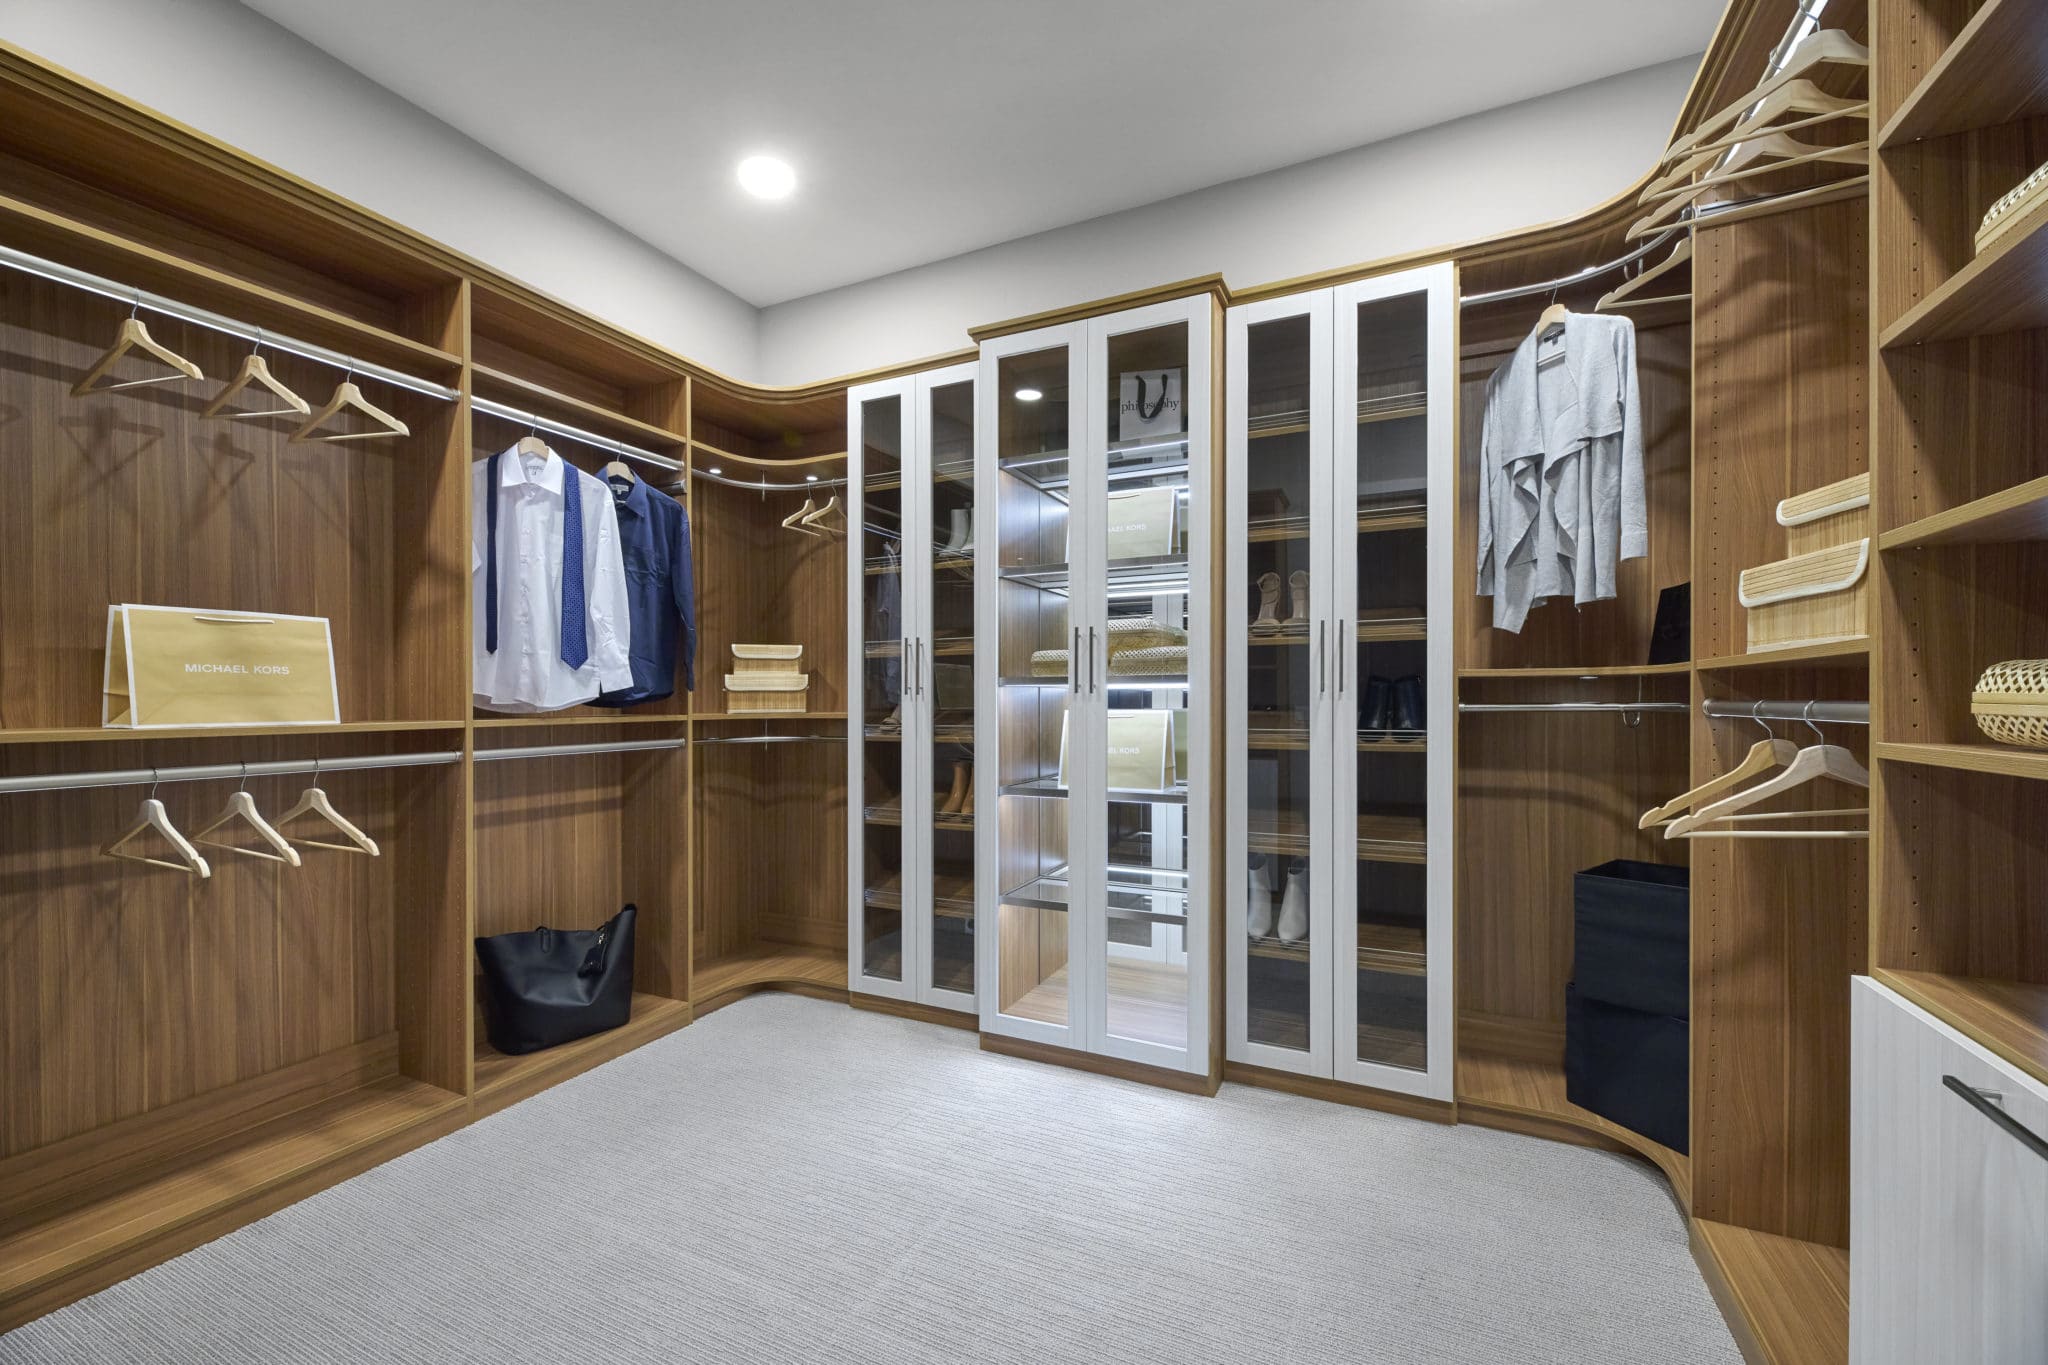 Primary Closet of Plan 3 at Overlook by Tri Pointe